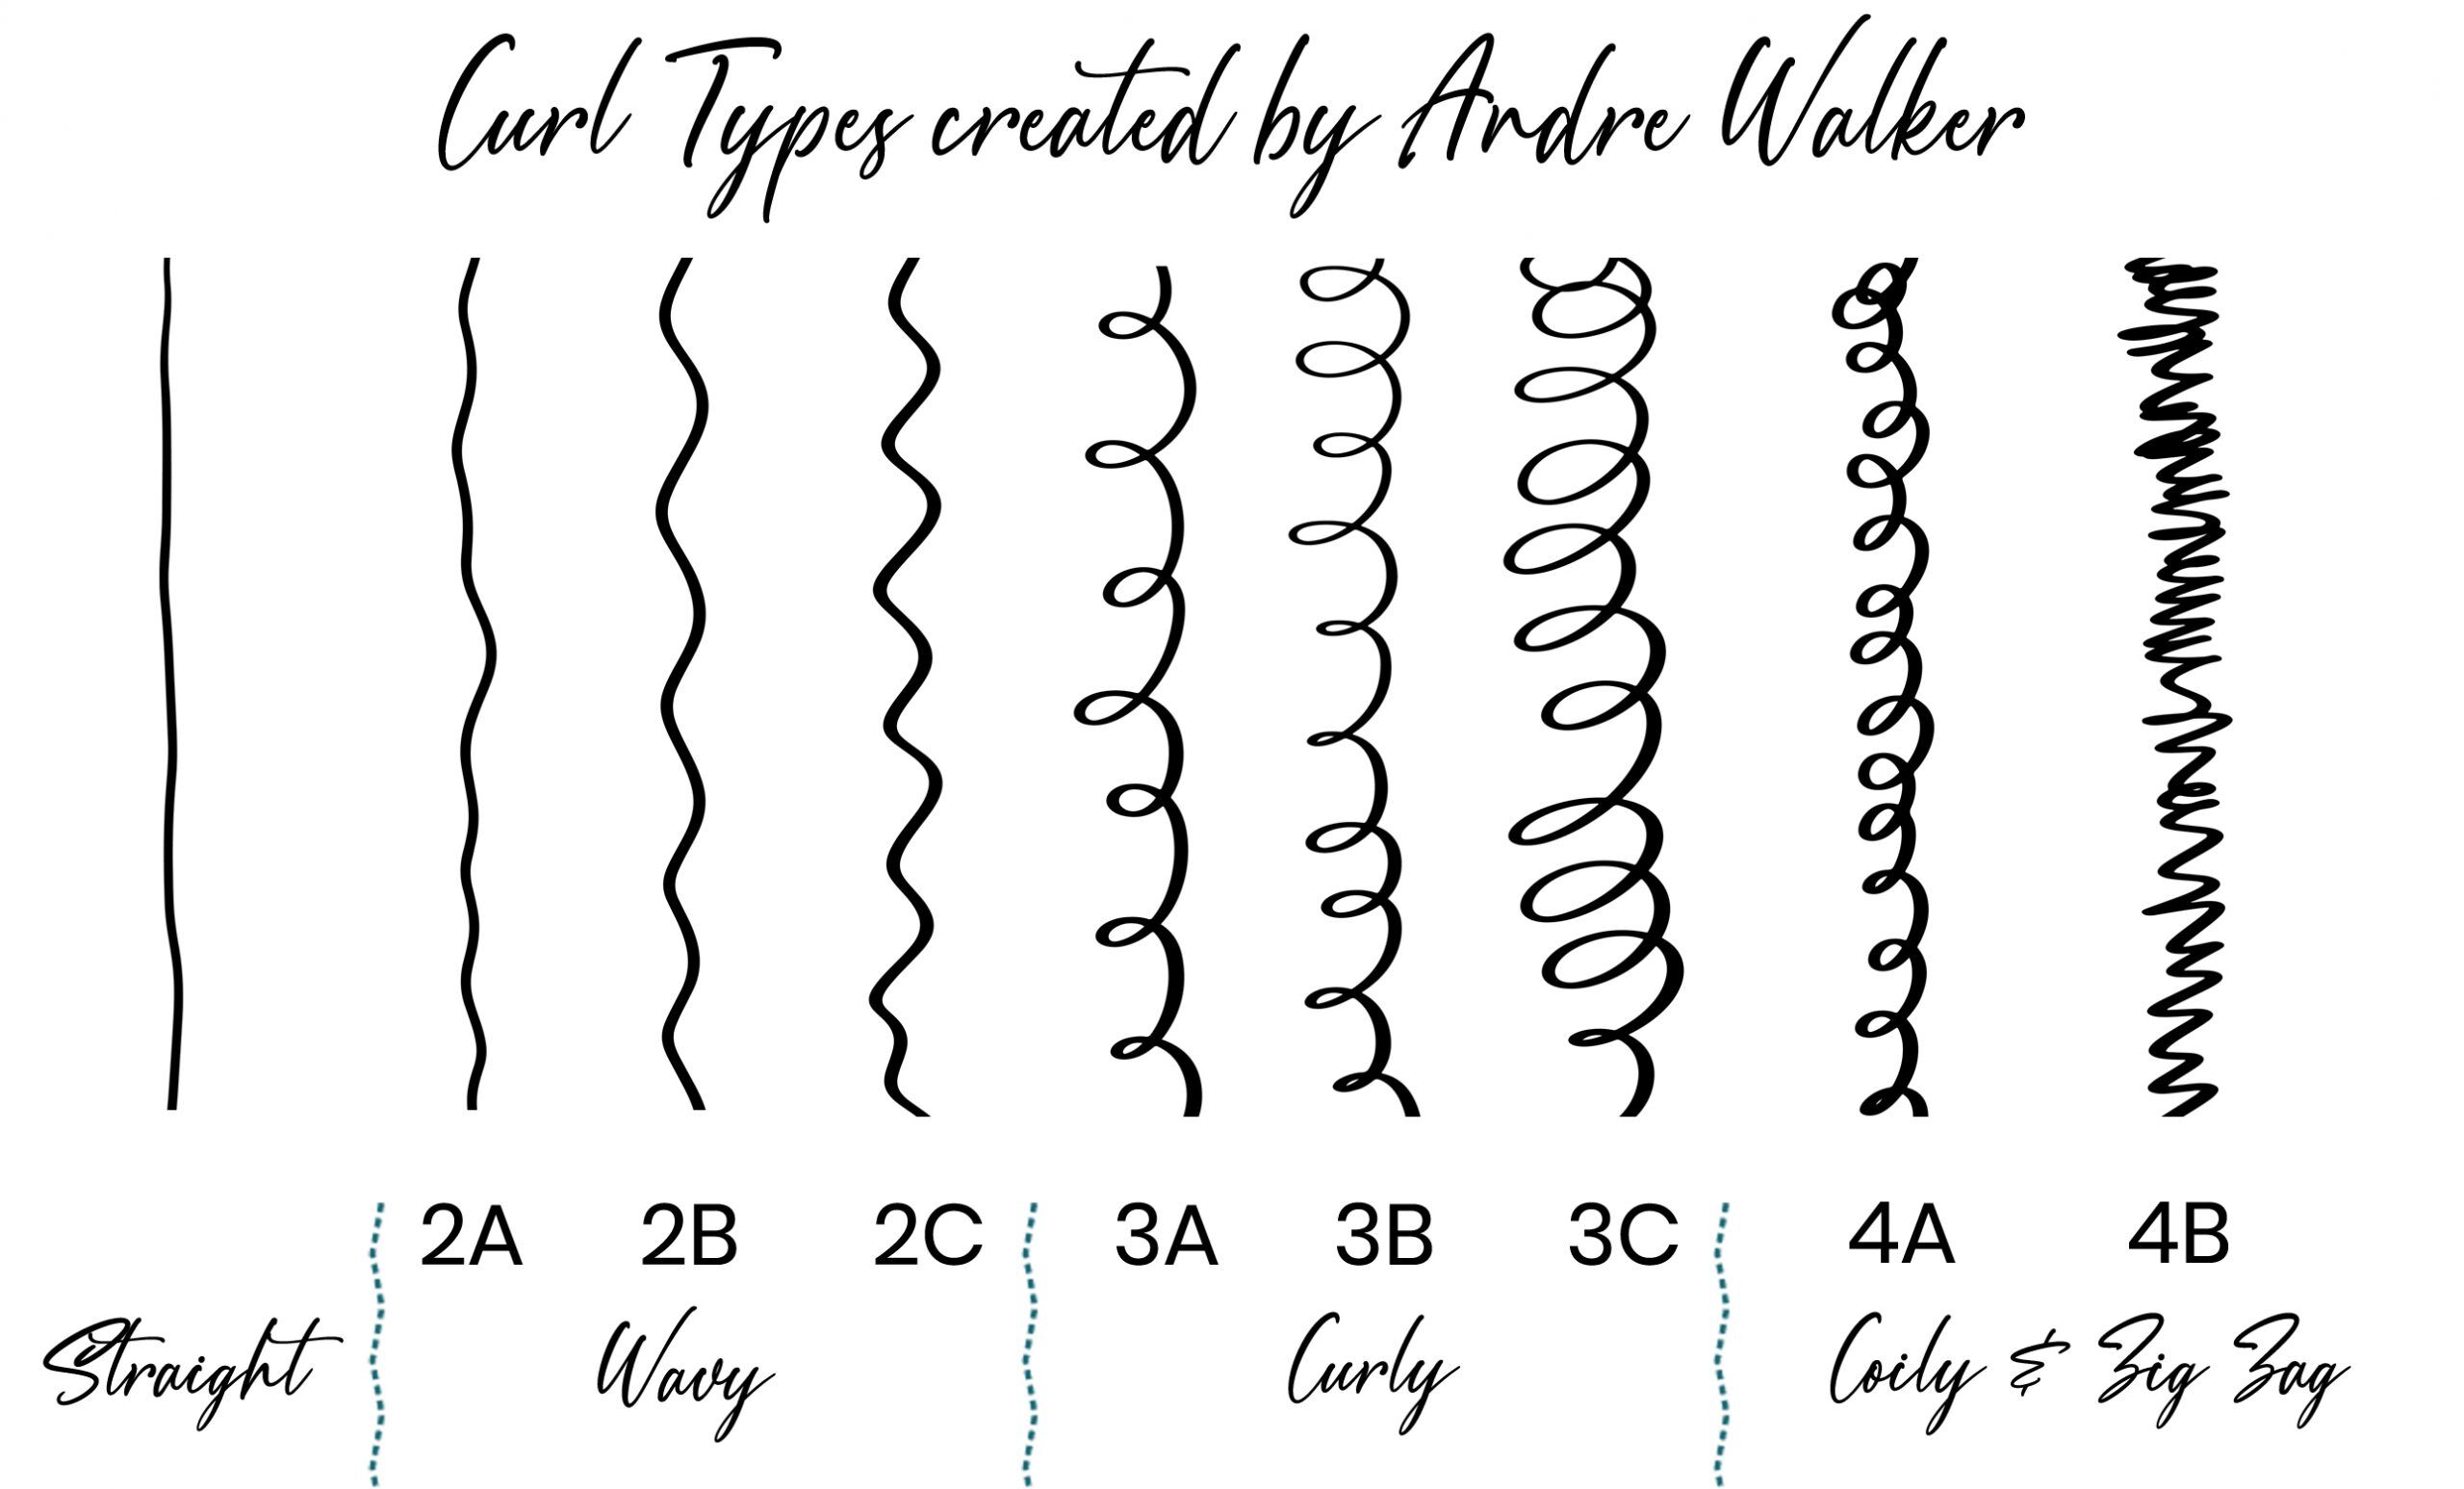 Curl Types Chart